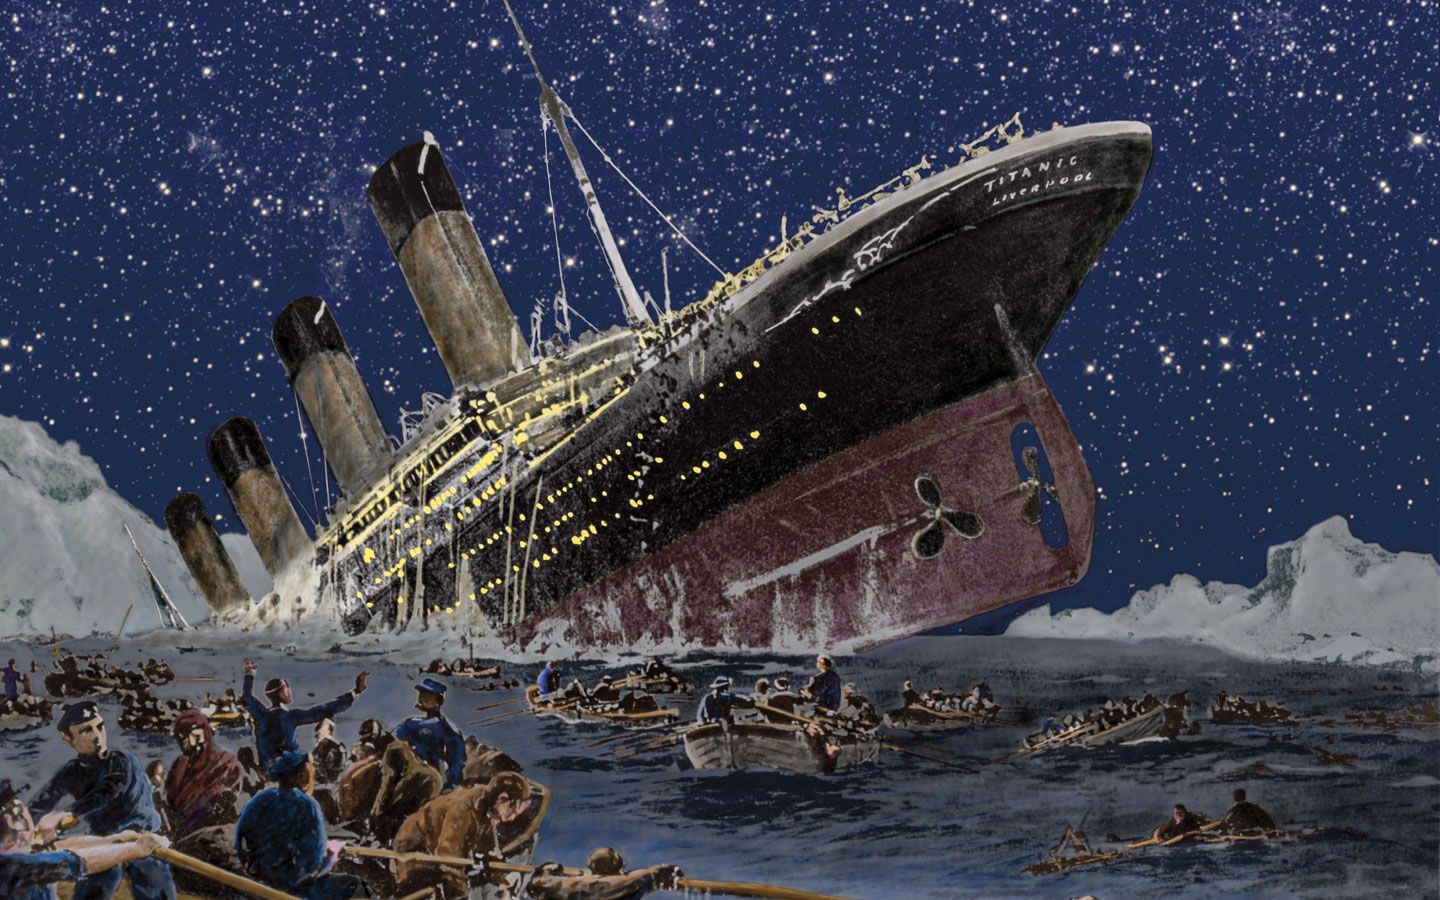 The Titanic sinking while people in life boats stand by